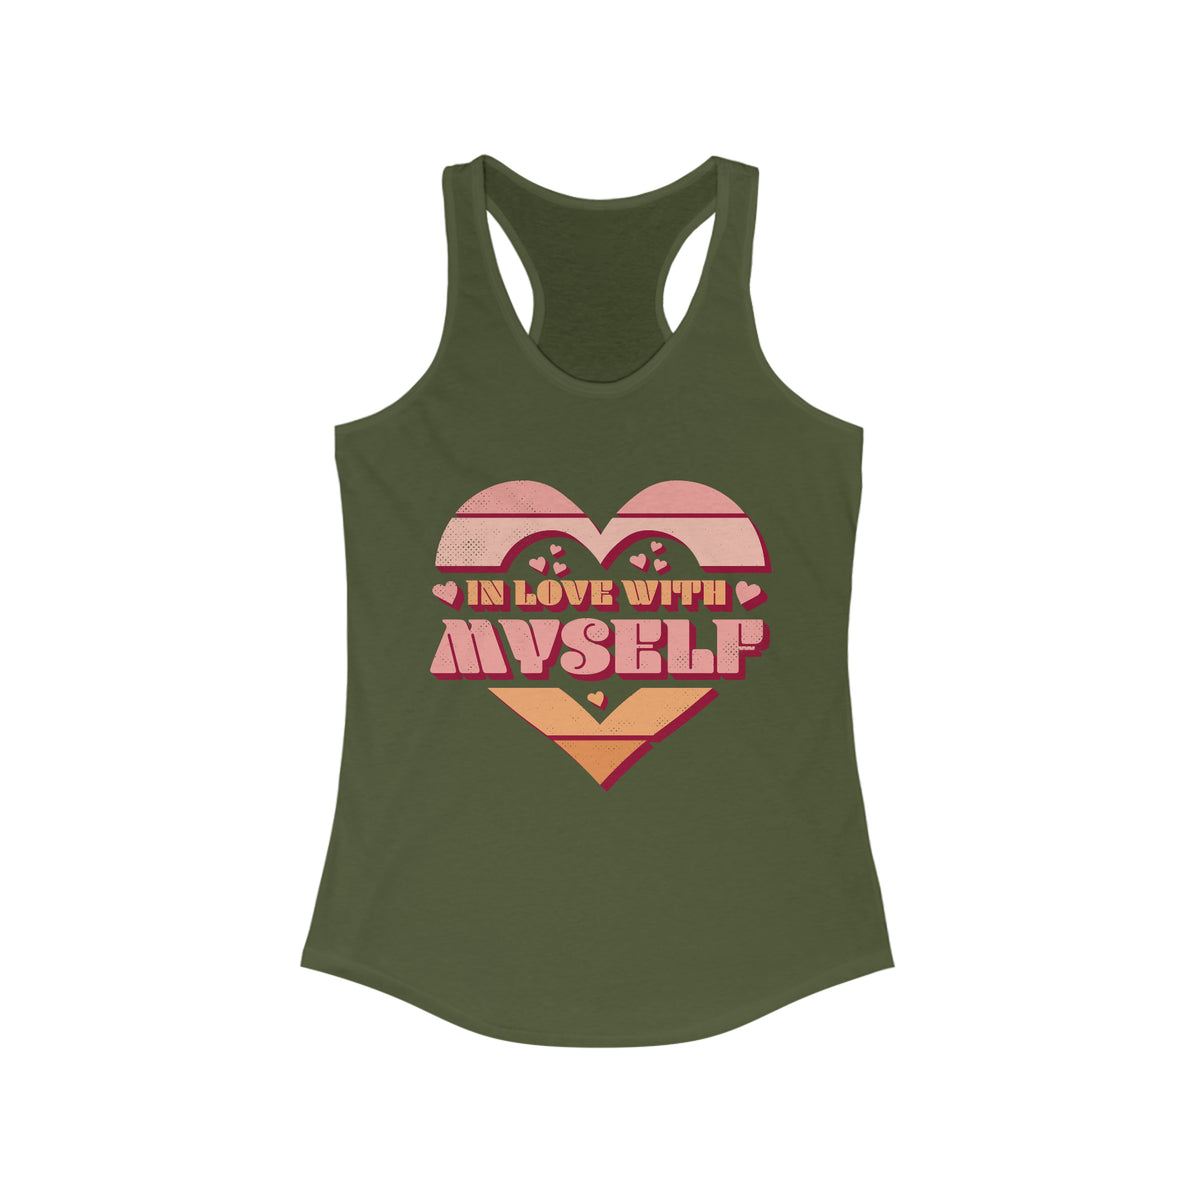 In Love With Myself Affirmation Shirt | Valentines Day Shirt | Gift For Her | Women's Slim-fit Racerback Tank